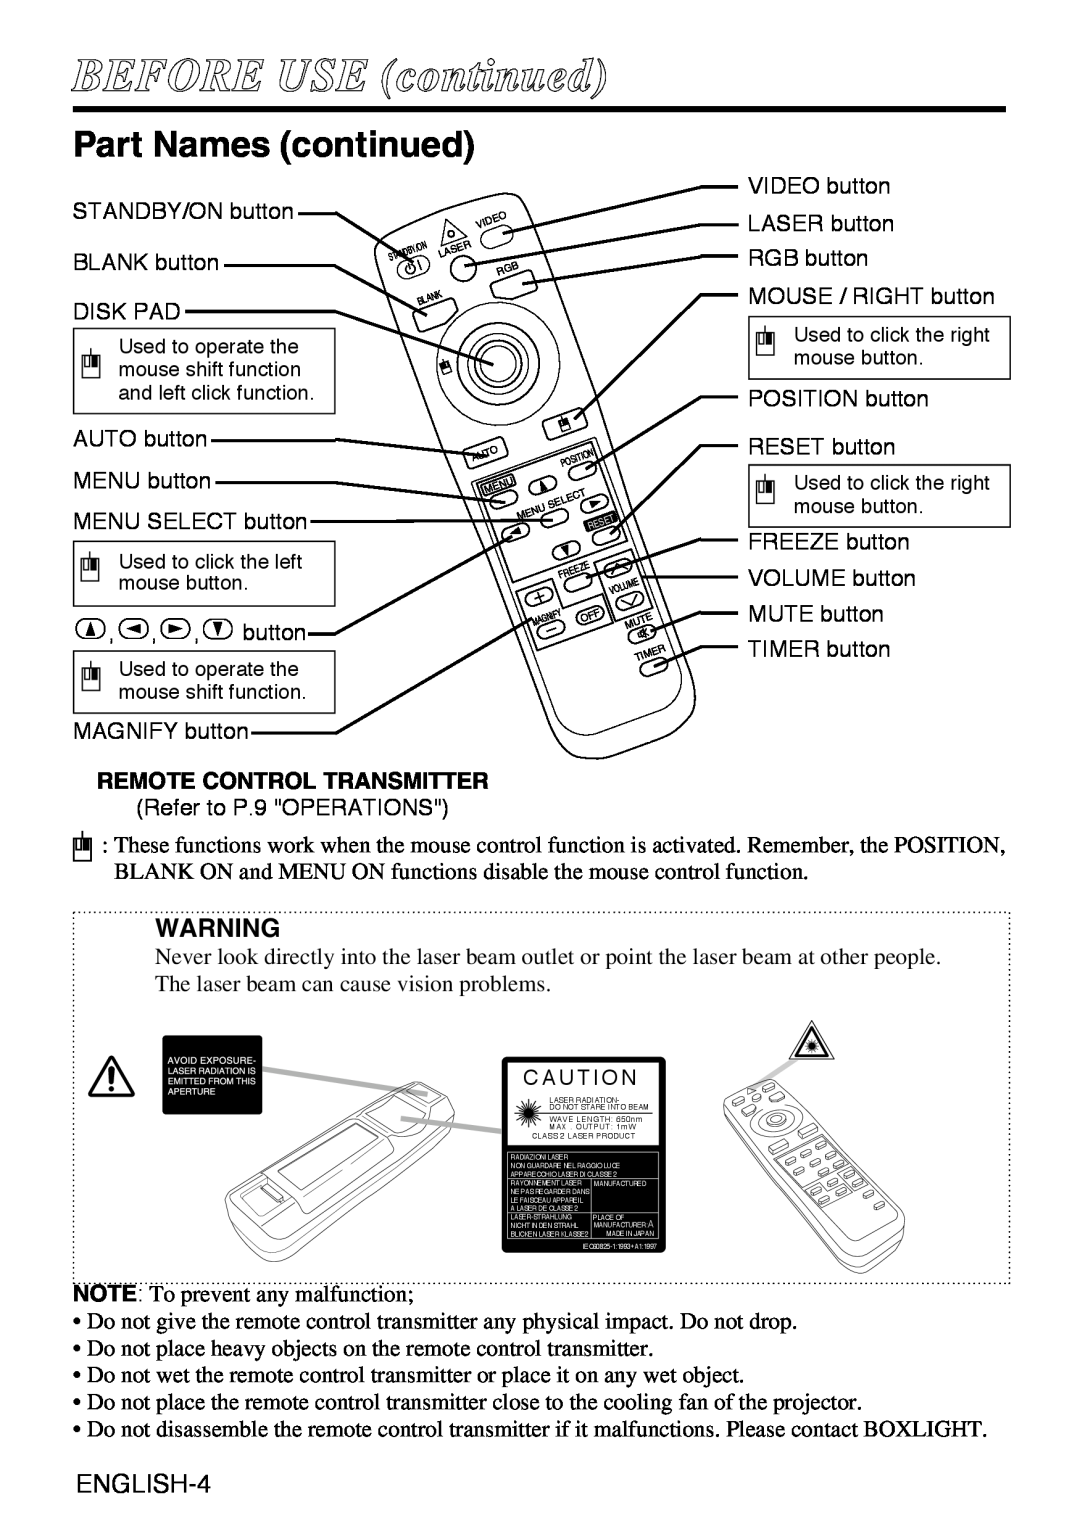 Grundig CP-731i user manual Part Names continued, BEFORE USE continued, ENGLISH-4, Remote Control Transmitter 